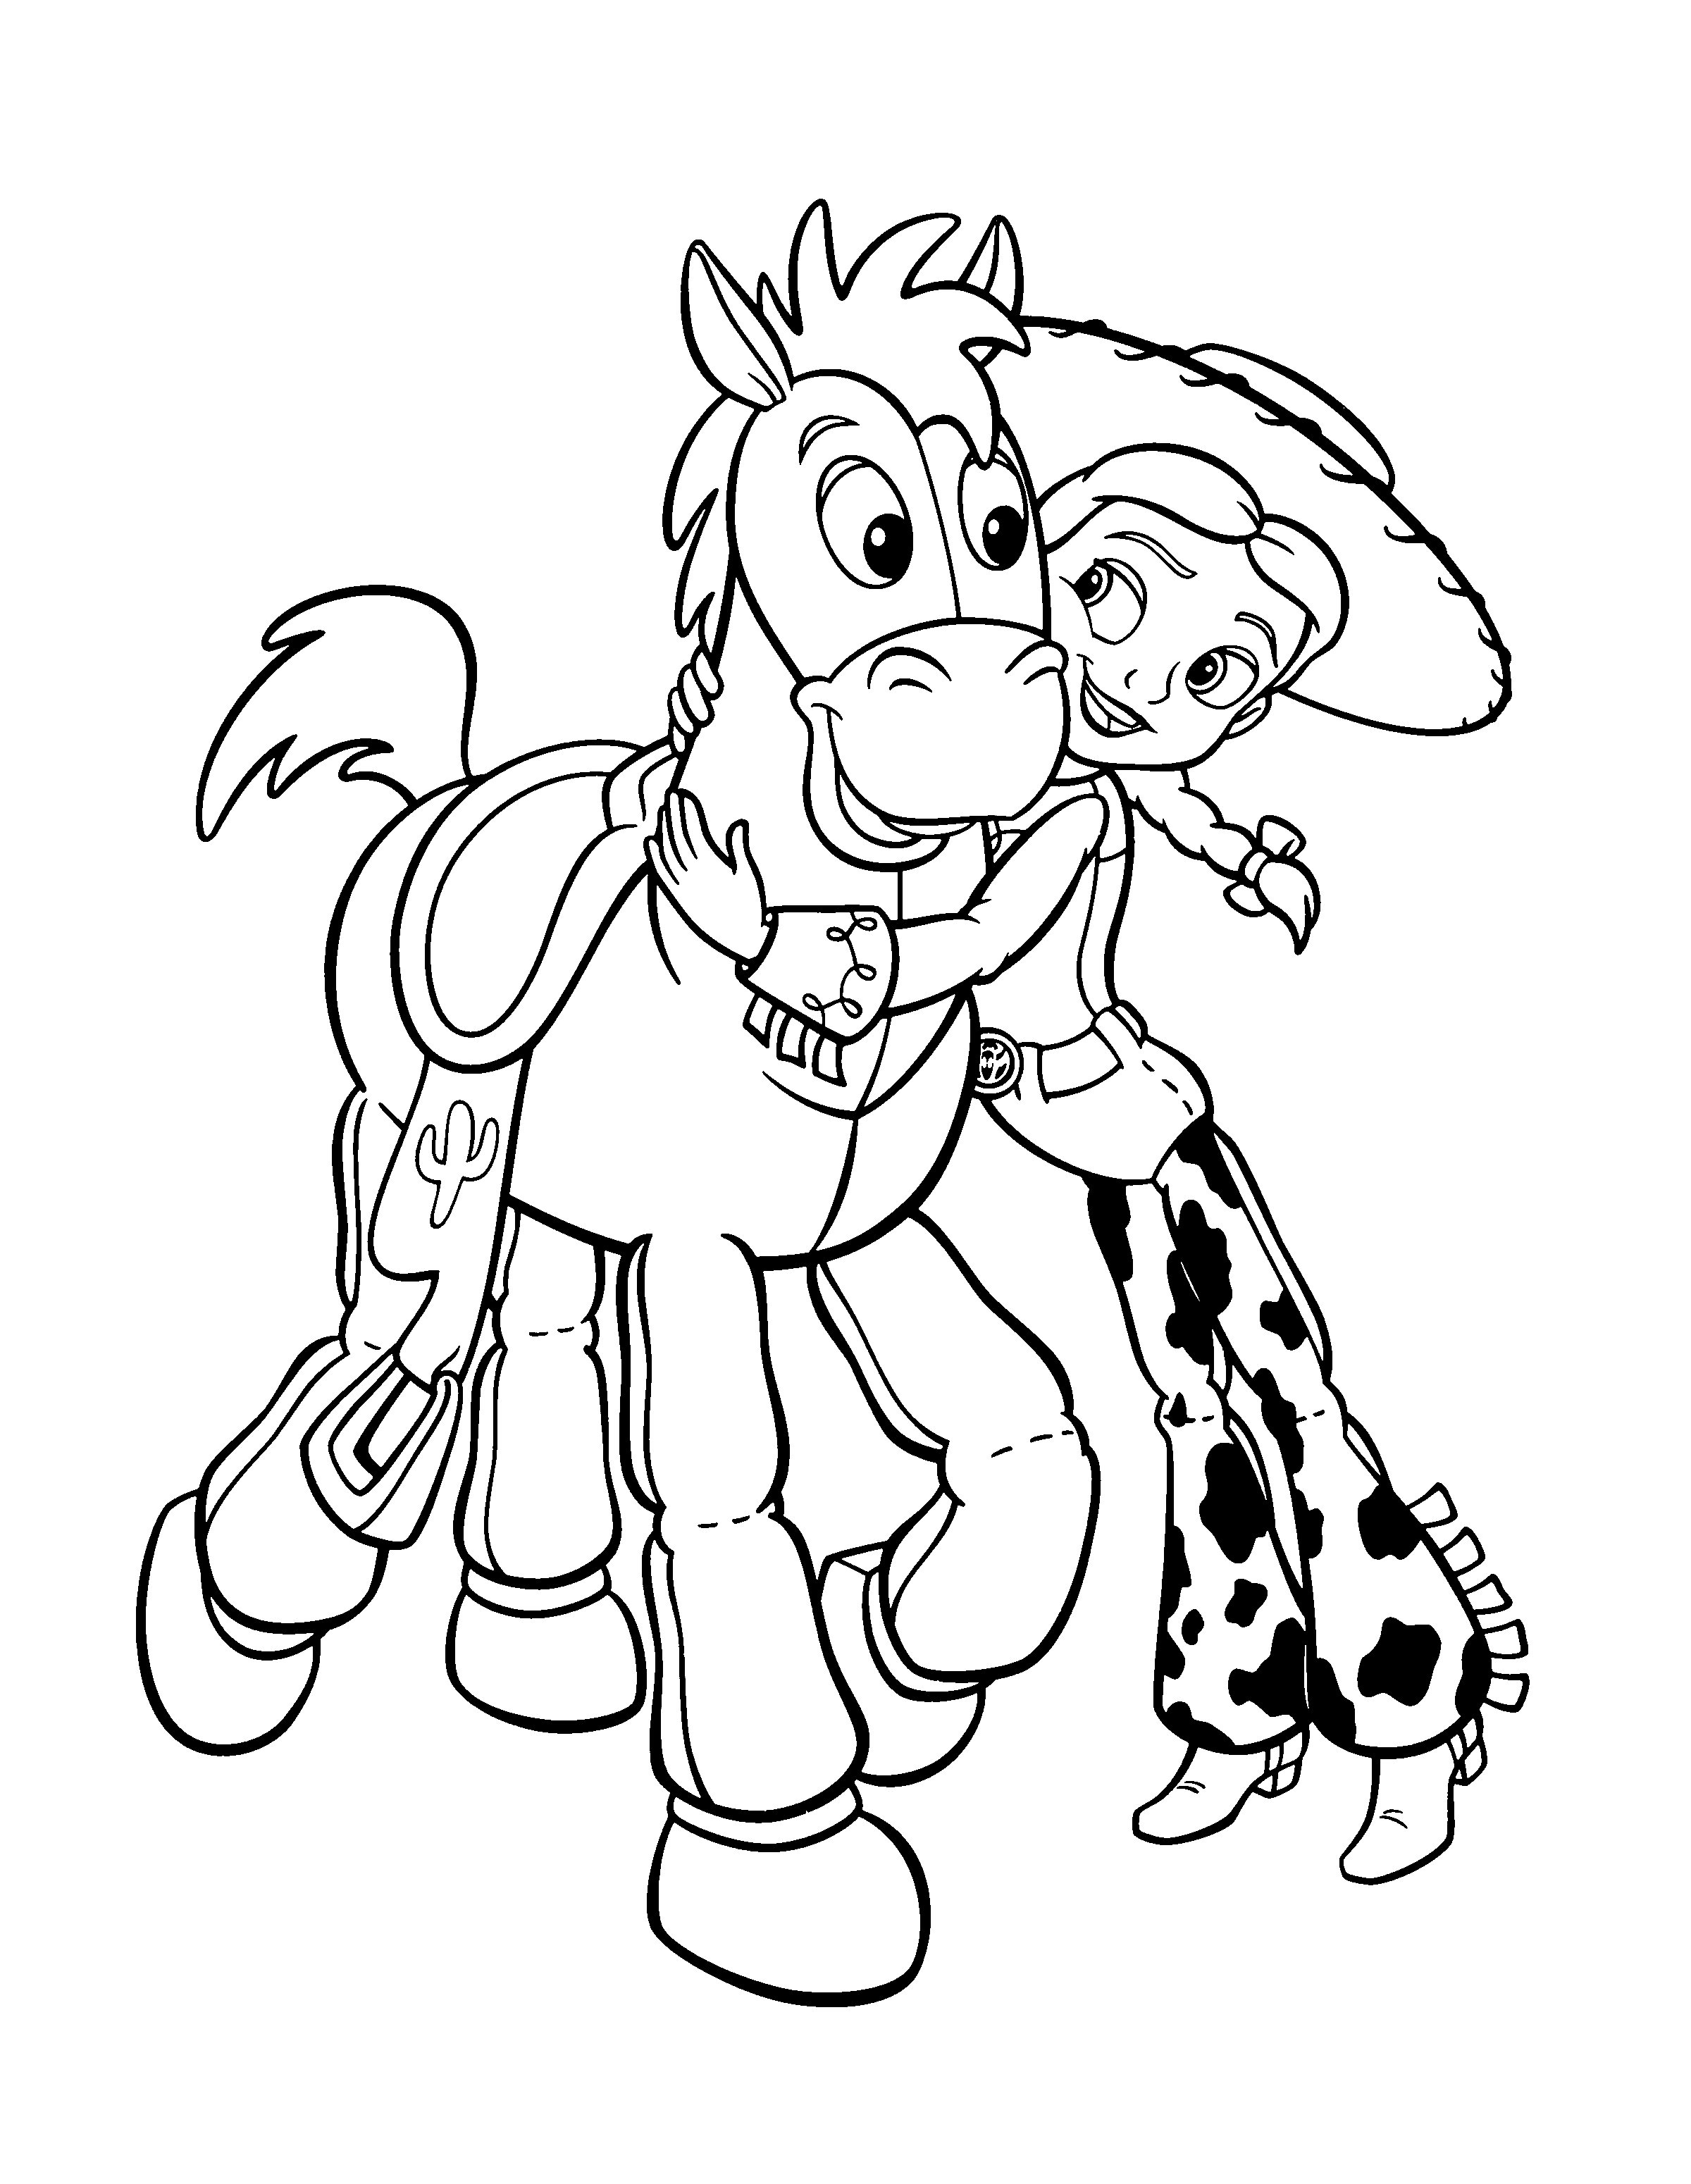 Drawings Toy Story (Animation Movies) Printable coloring pages